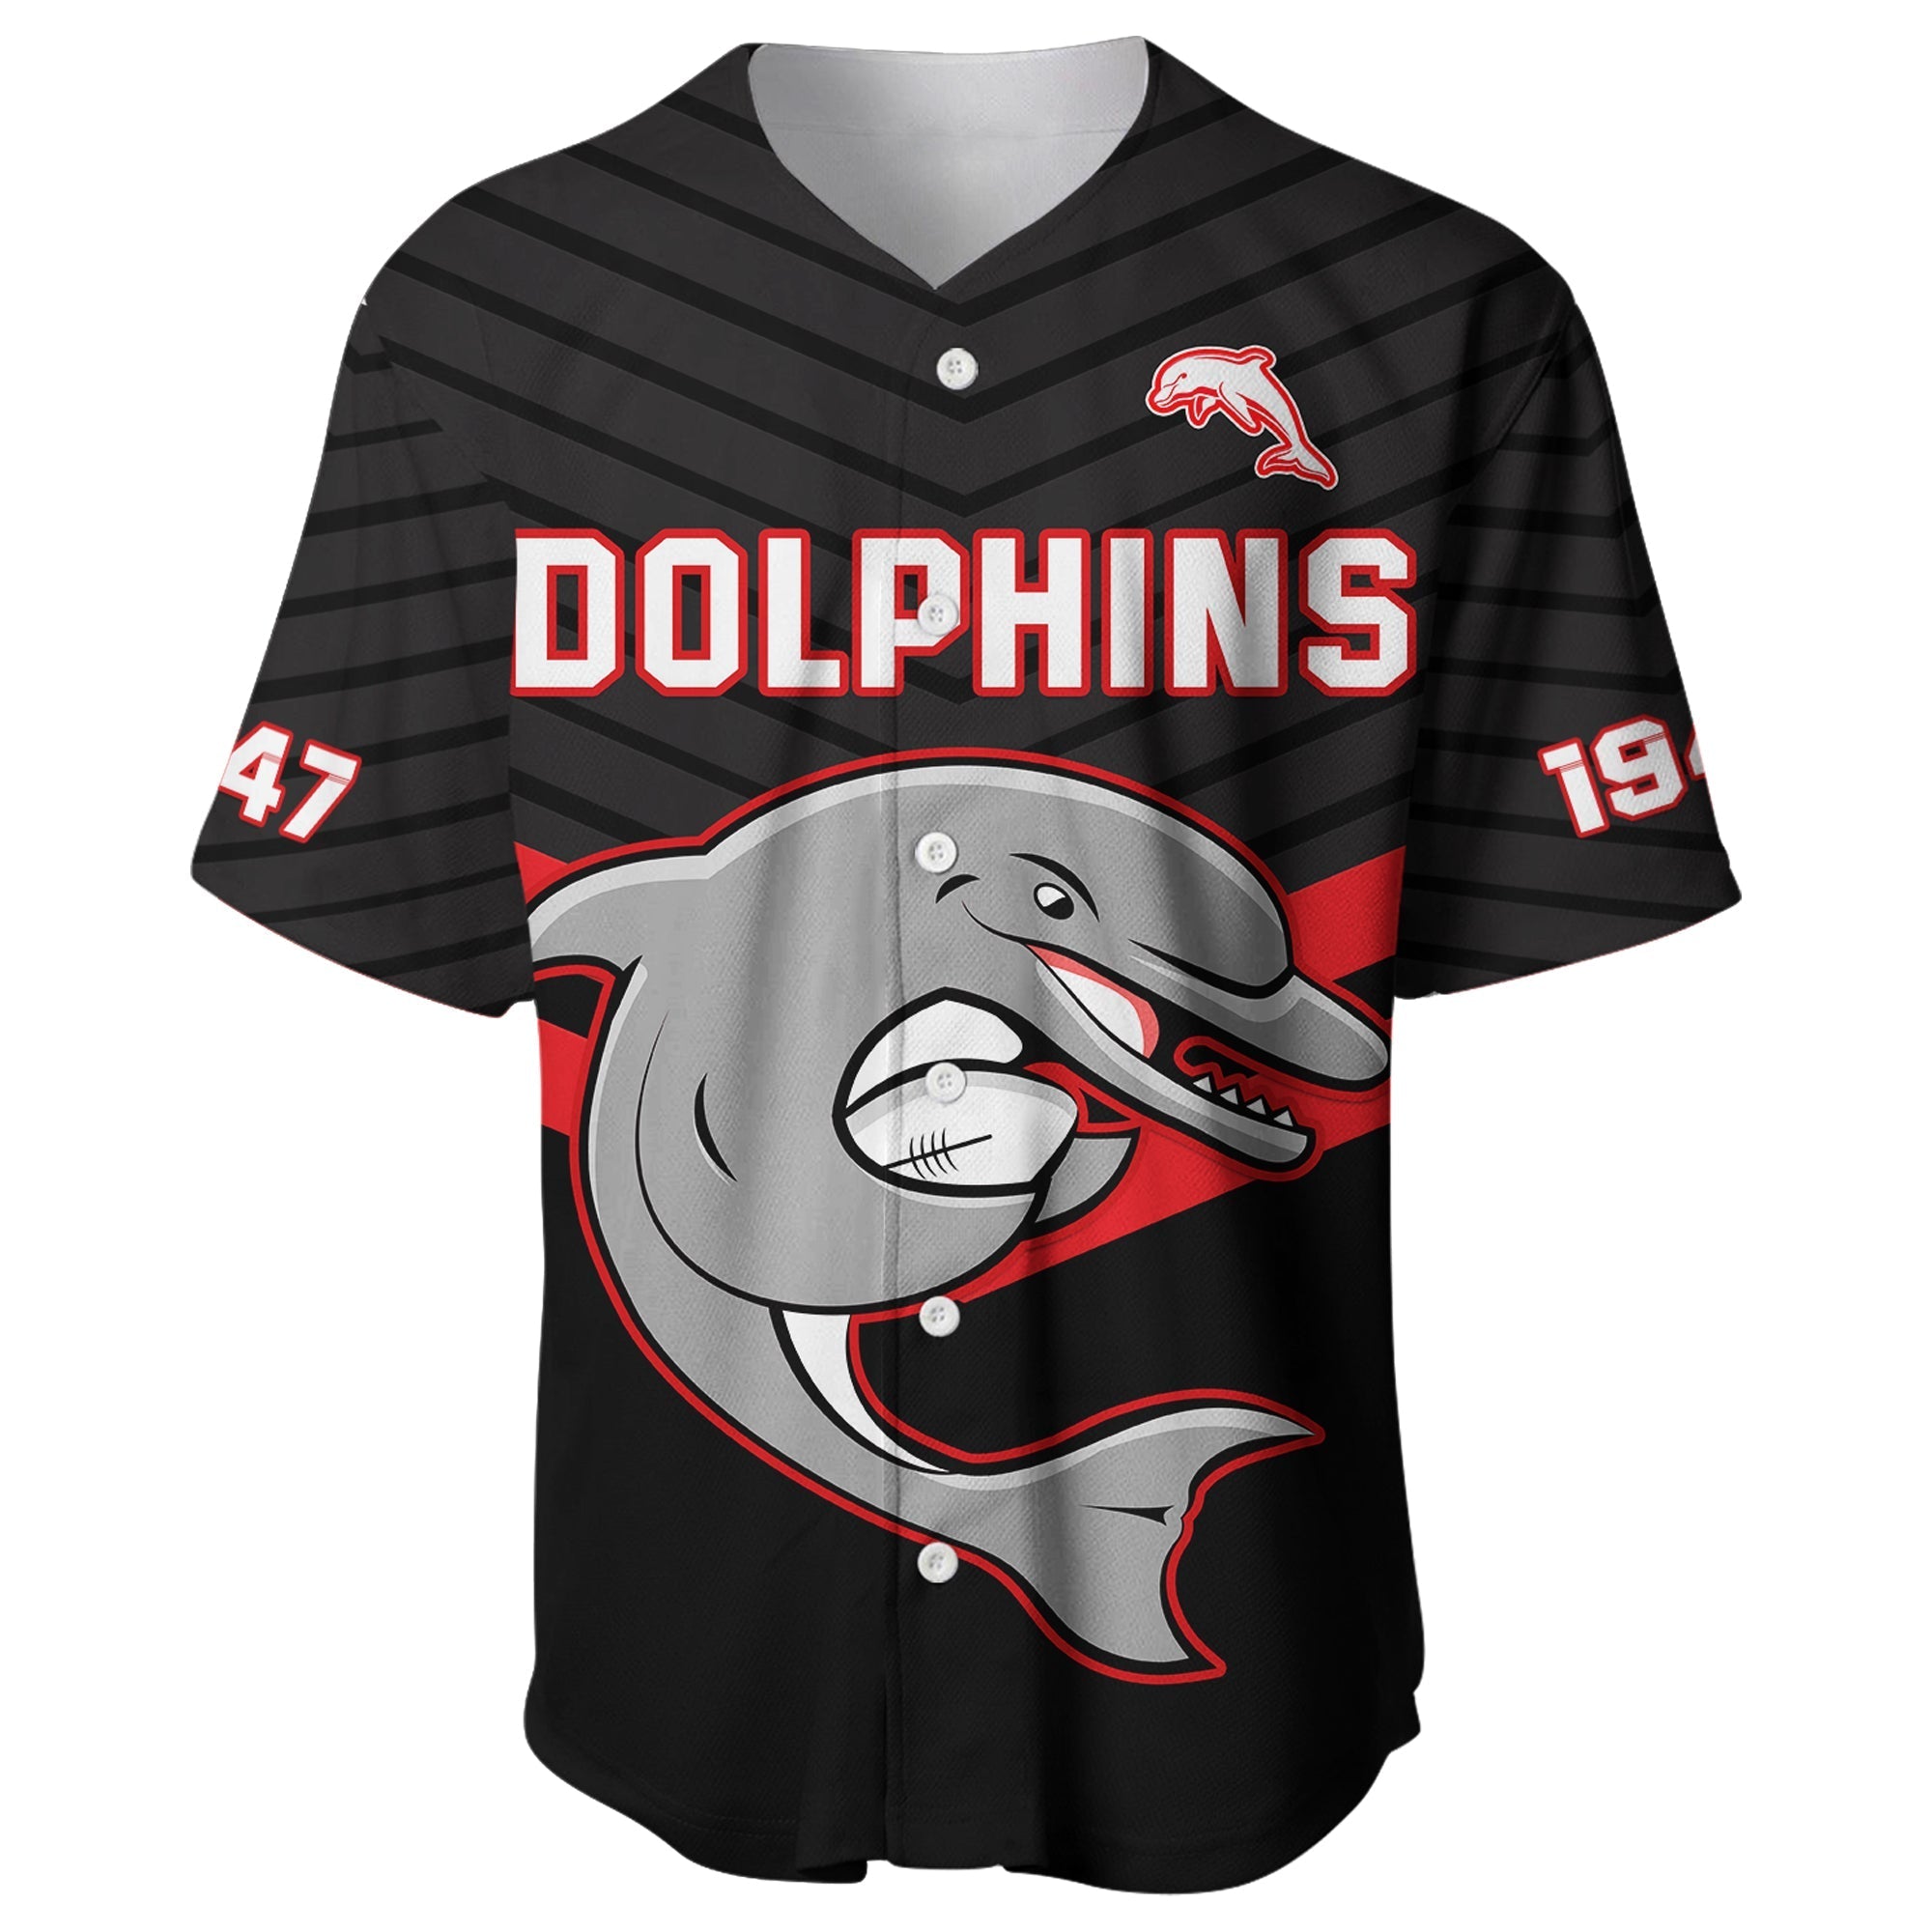 dolphins-rugby-baseball-jersey-sporty-style-ver03